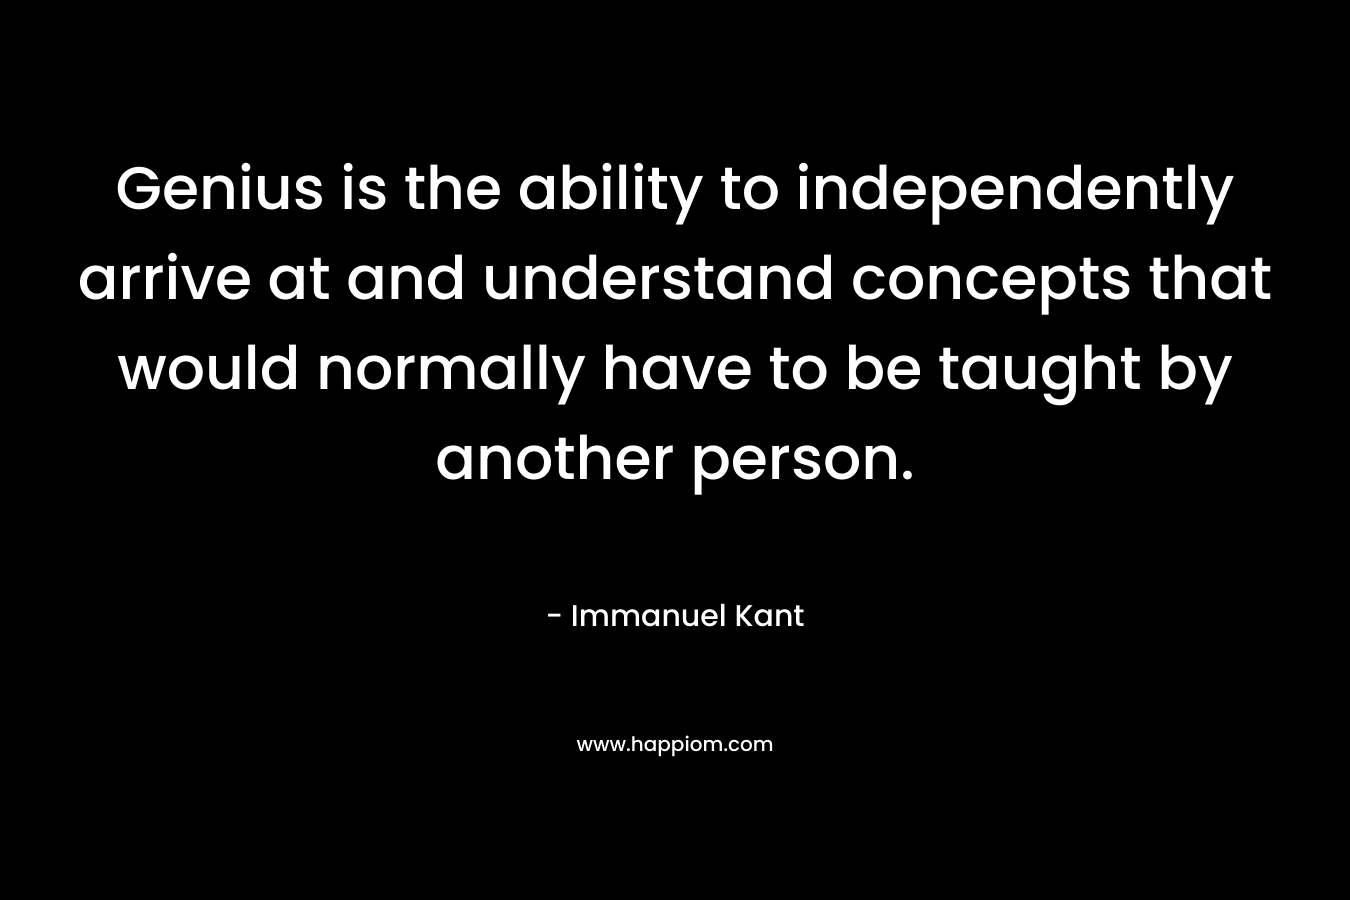 Genius is the ability to independently arrive at and understand concepts that would normally have to be taught by another person. – Immanuel Kant